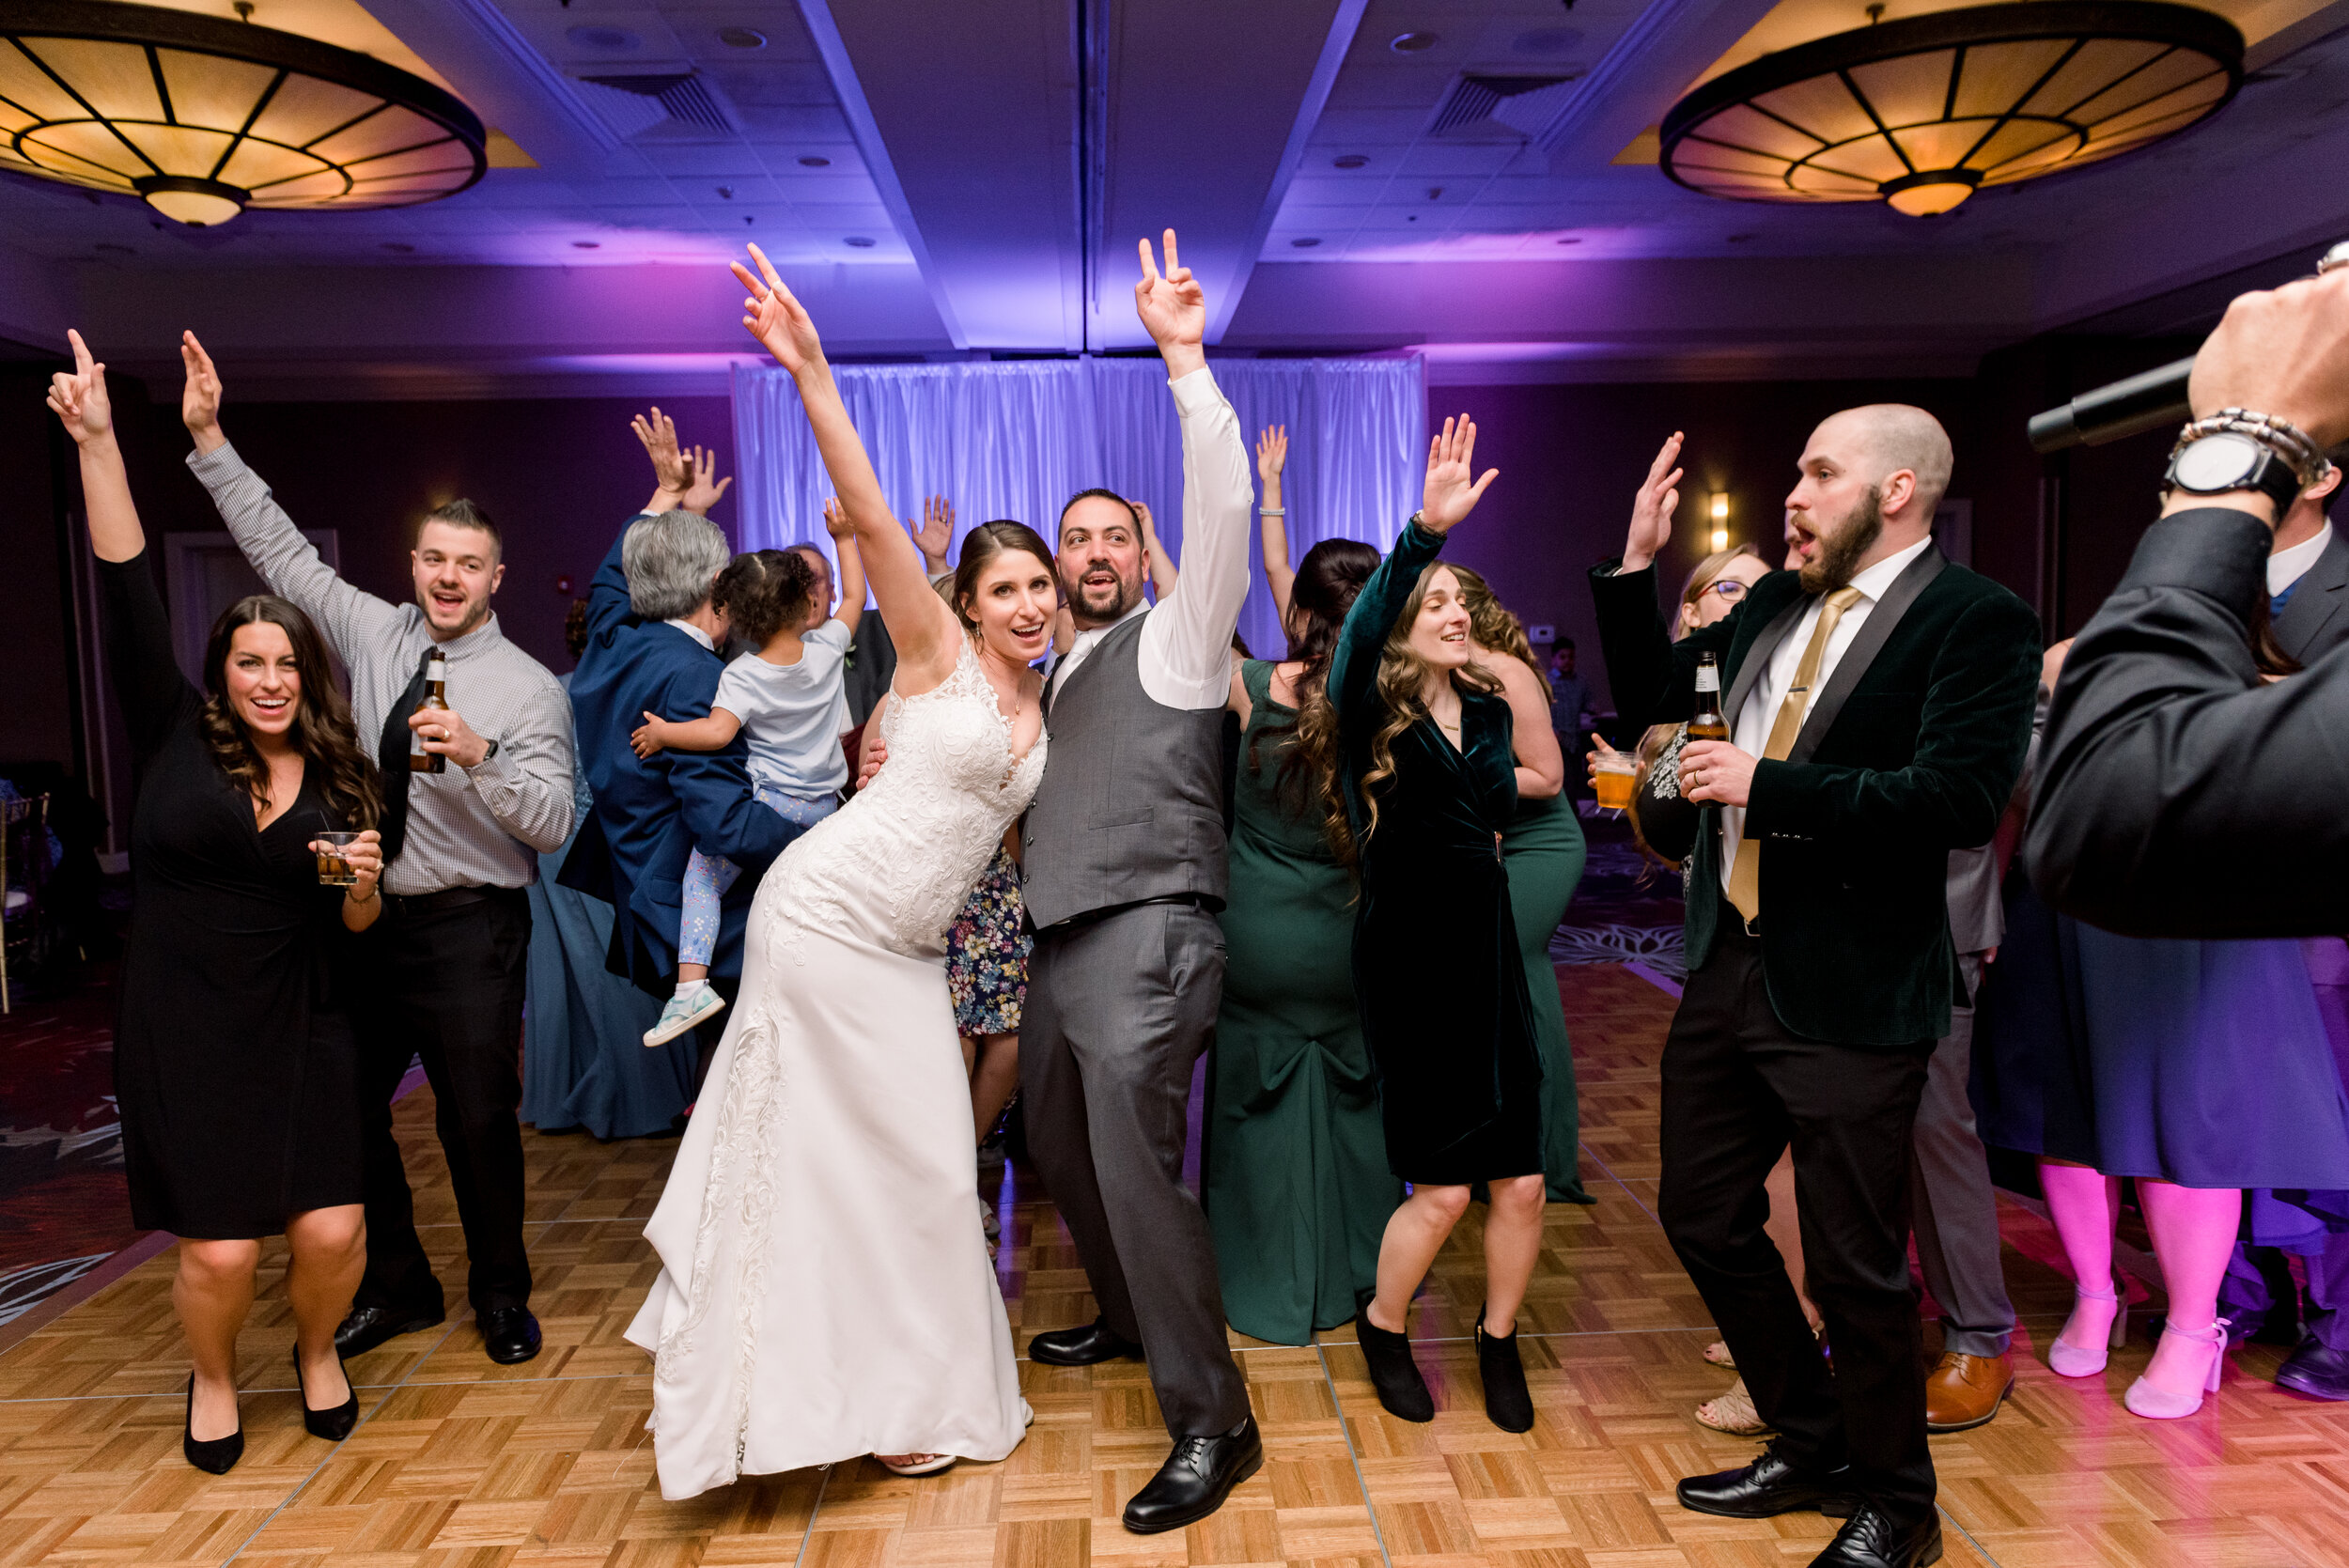 Weddings-at-The-DoubleTree-by-Hilton-Hotel-Pittsburgh-Ashley-Reed-Photography-96.jpg